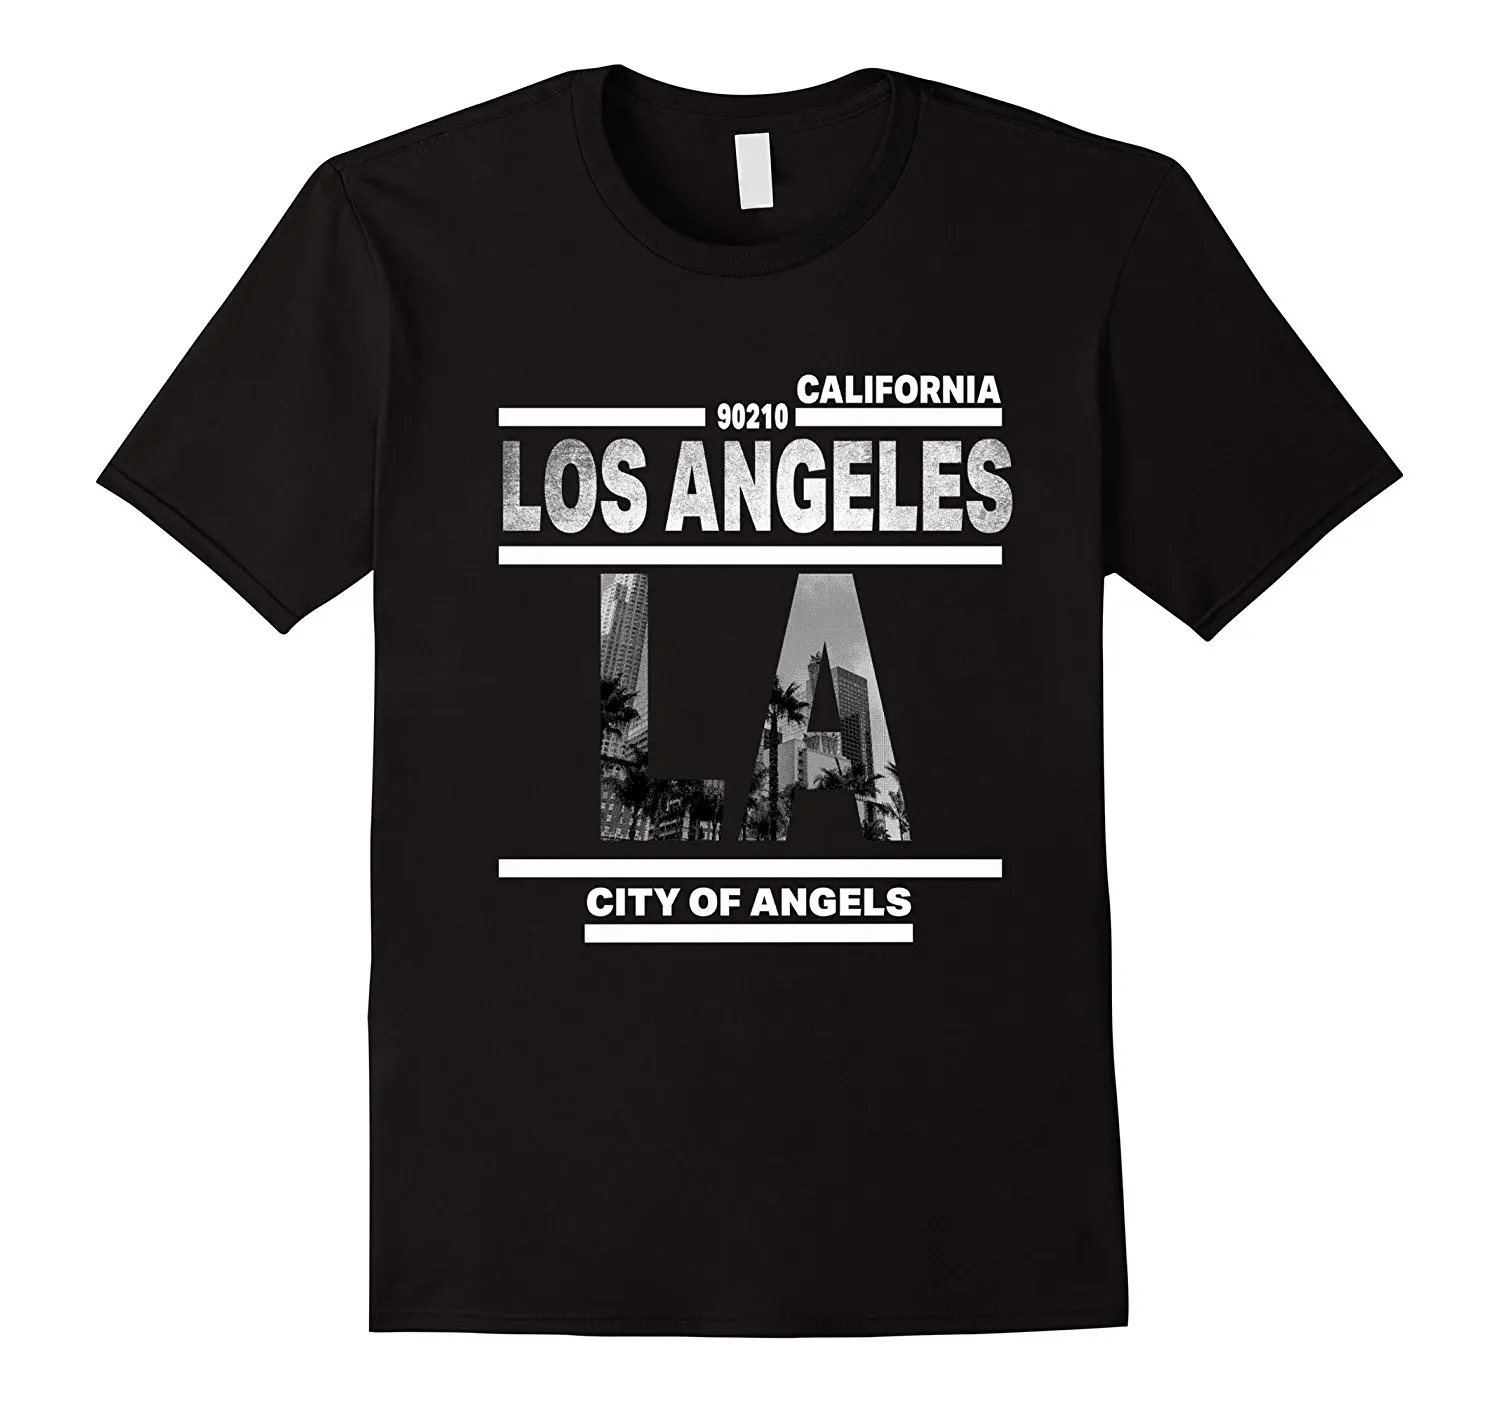 Los Angeles California T shirt for Los angeles Fans t shirts-in T ...